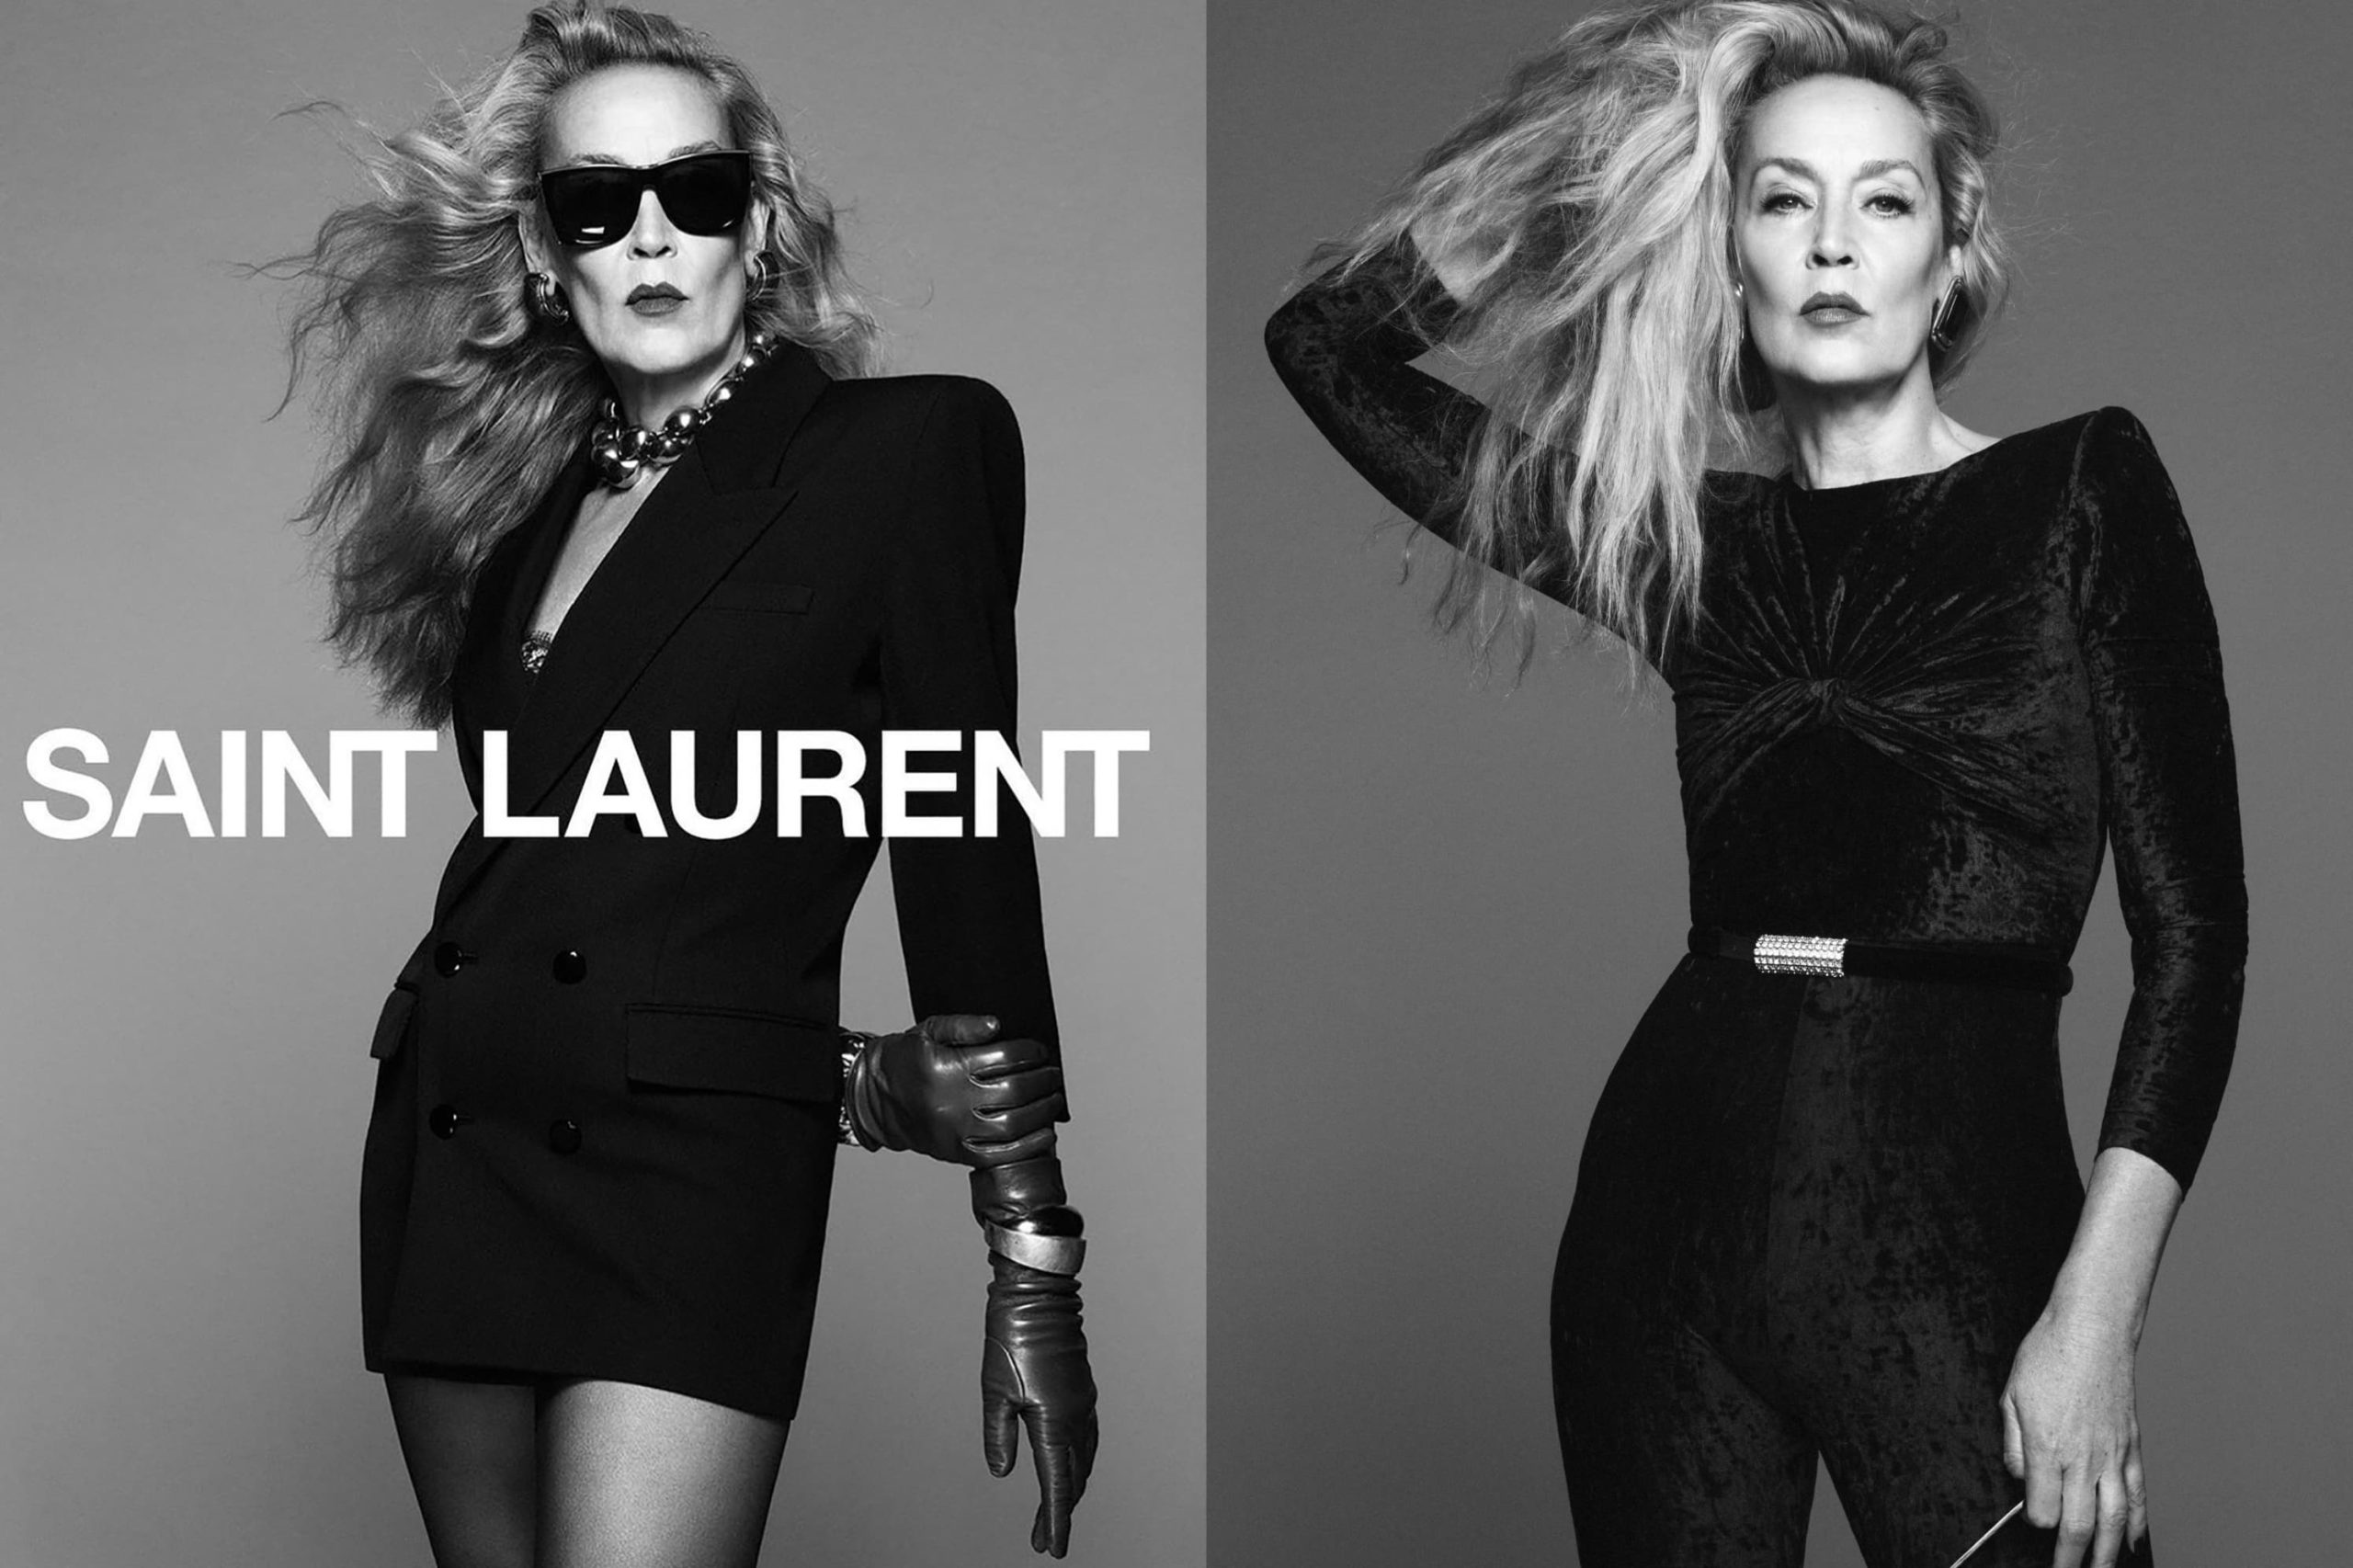 SAINT LAURENT 'JERRY HALL' SPRING 2022 AD CAMPAIGN